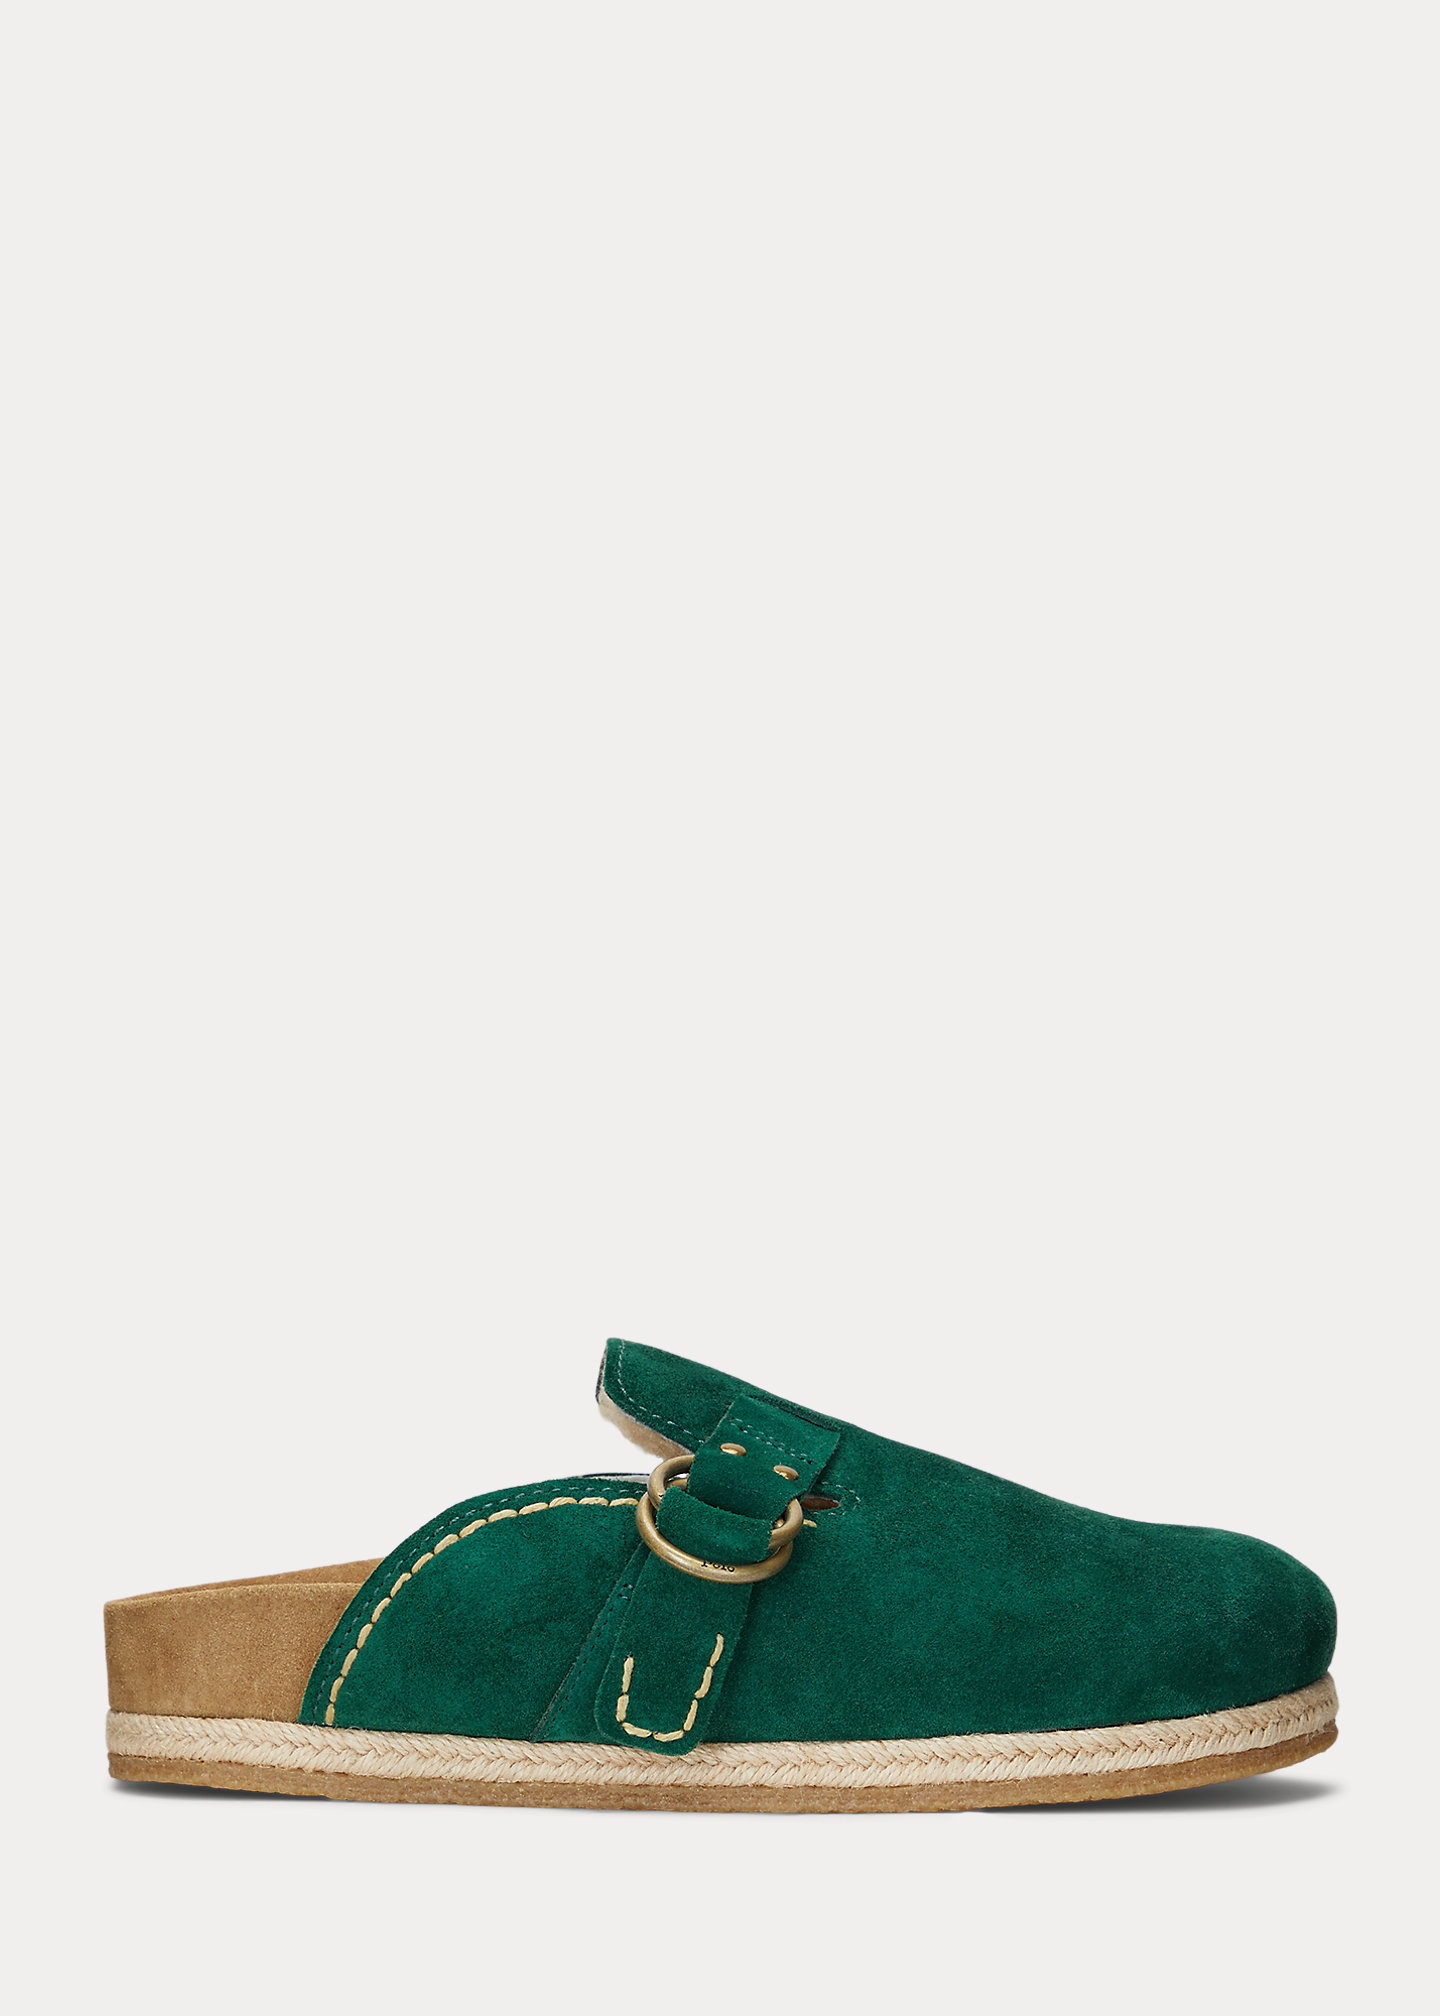 Turbach Shearling-Lined Suede Clog